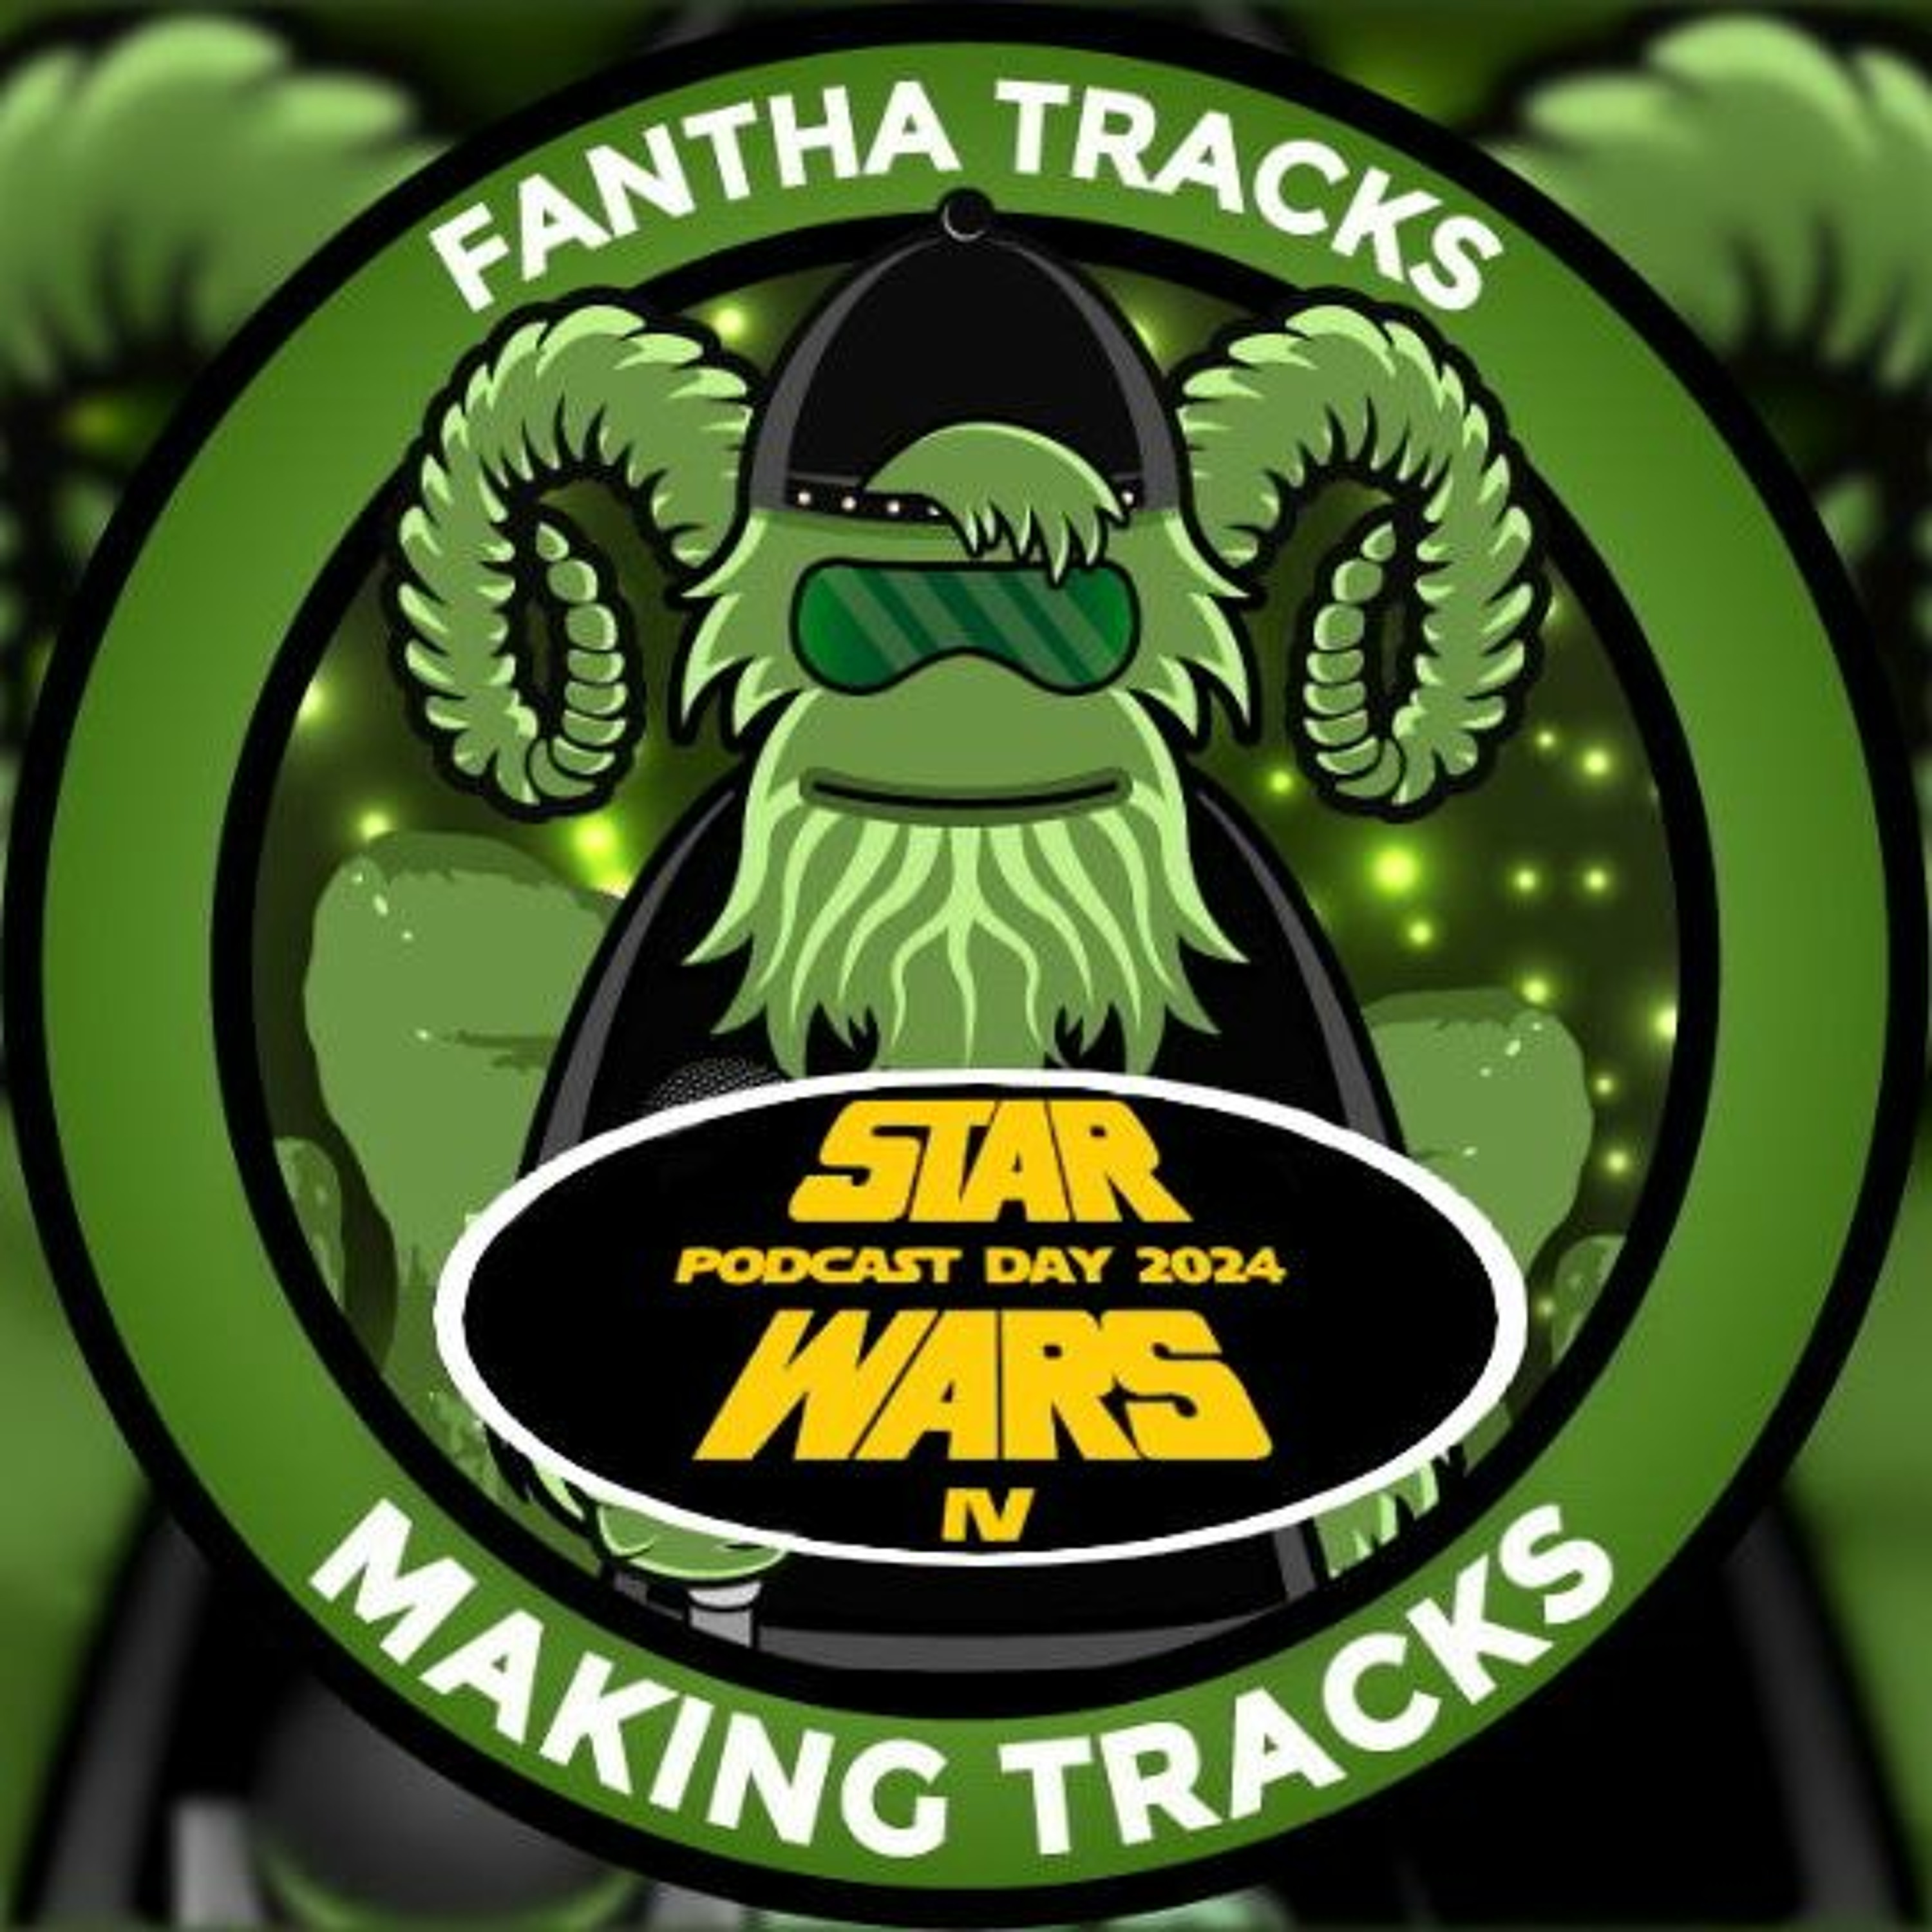 Making Tracks: It was all about Jar Jar: Star Wars Podcast Day 2024